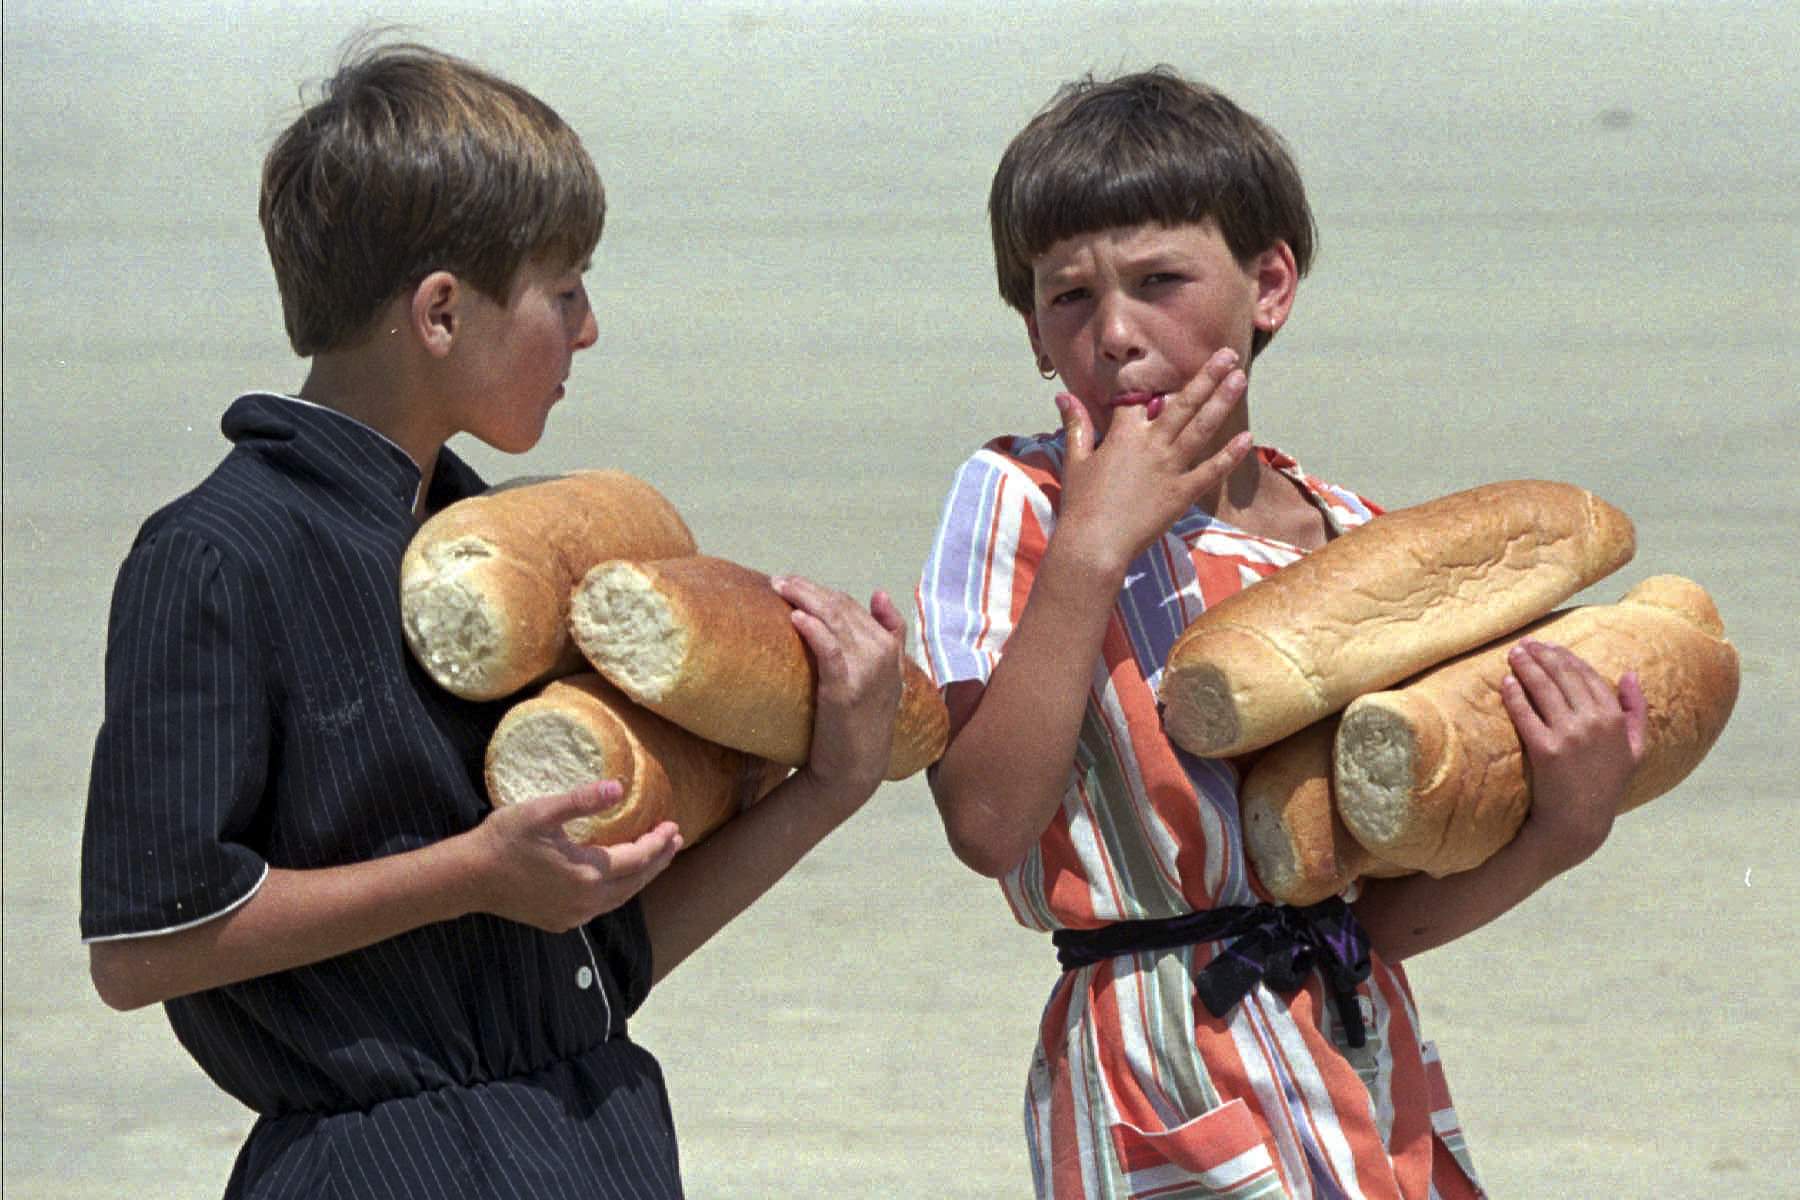 Bosnian refugee children from Srebrenica, carry loaves of bread, which they received from the United Nations at the refugee camp at Tuzla airport, July 19, 1995.